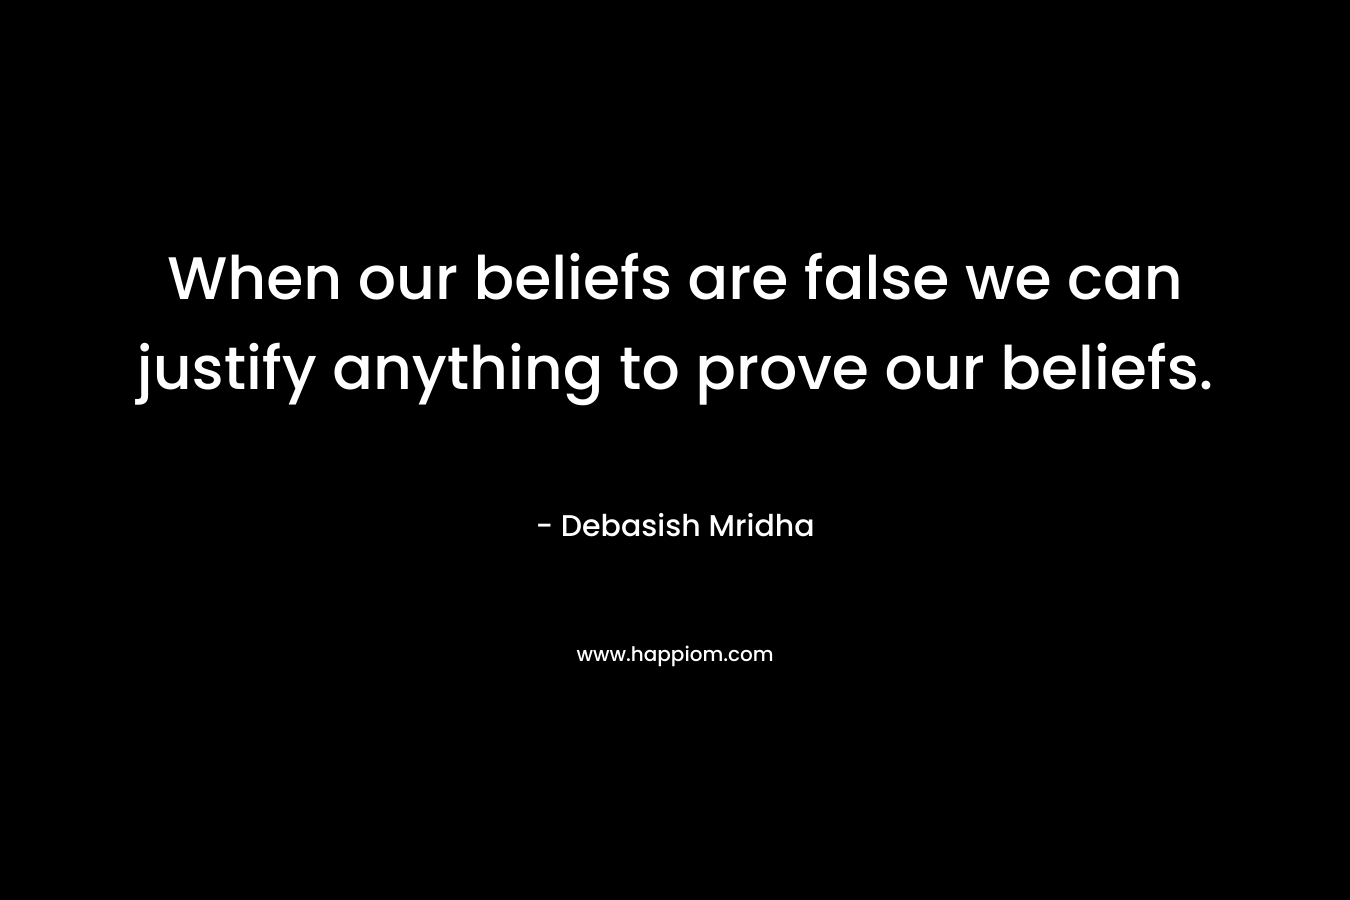 When our beliefs are false we can justify anything to prove our beliefs.